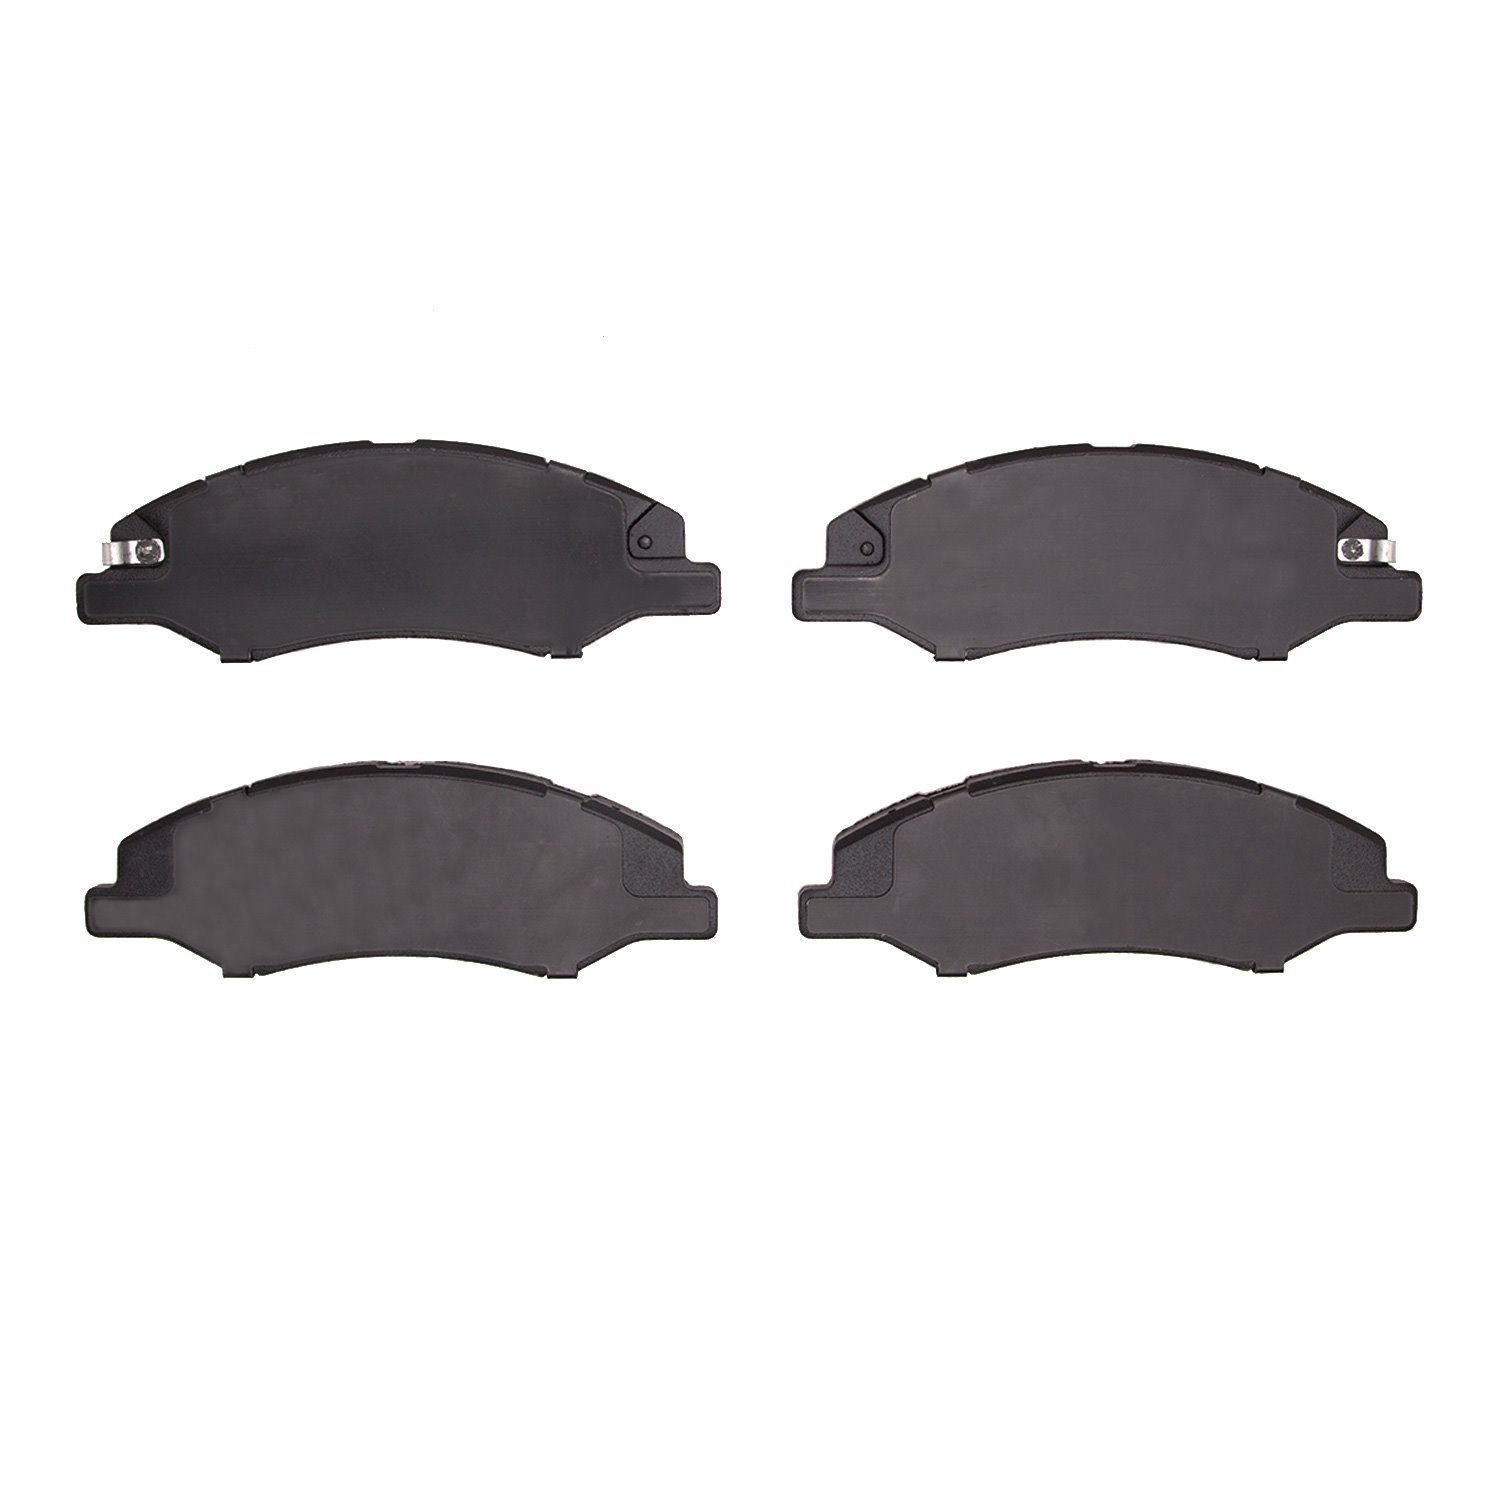 1551-2089-00 5000 Advanced Ceramic Brake Pads, Fits Select Acura/Honda, Position: Front